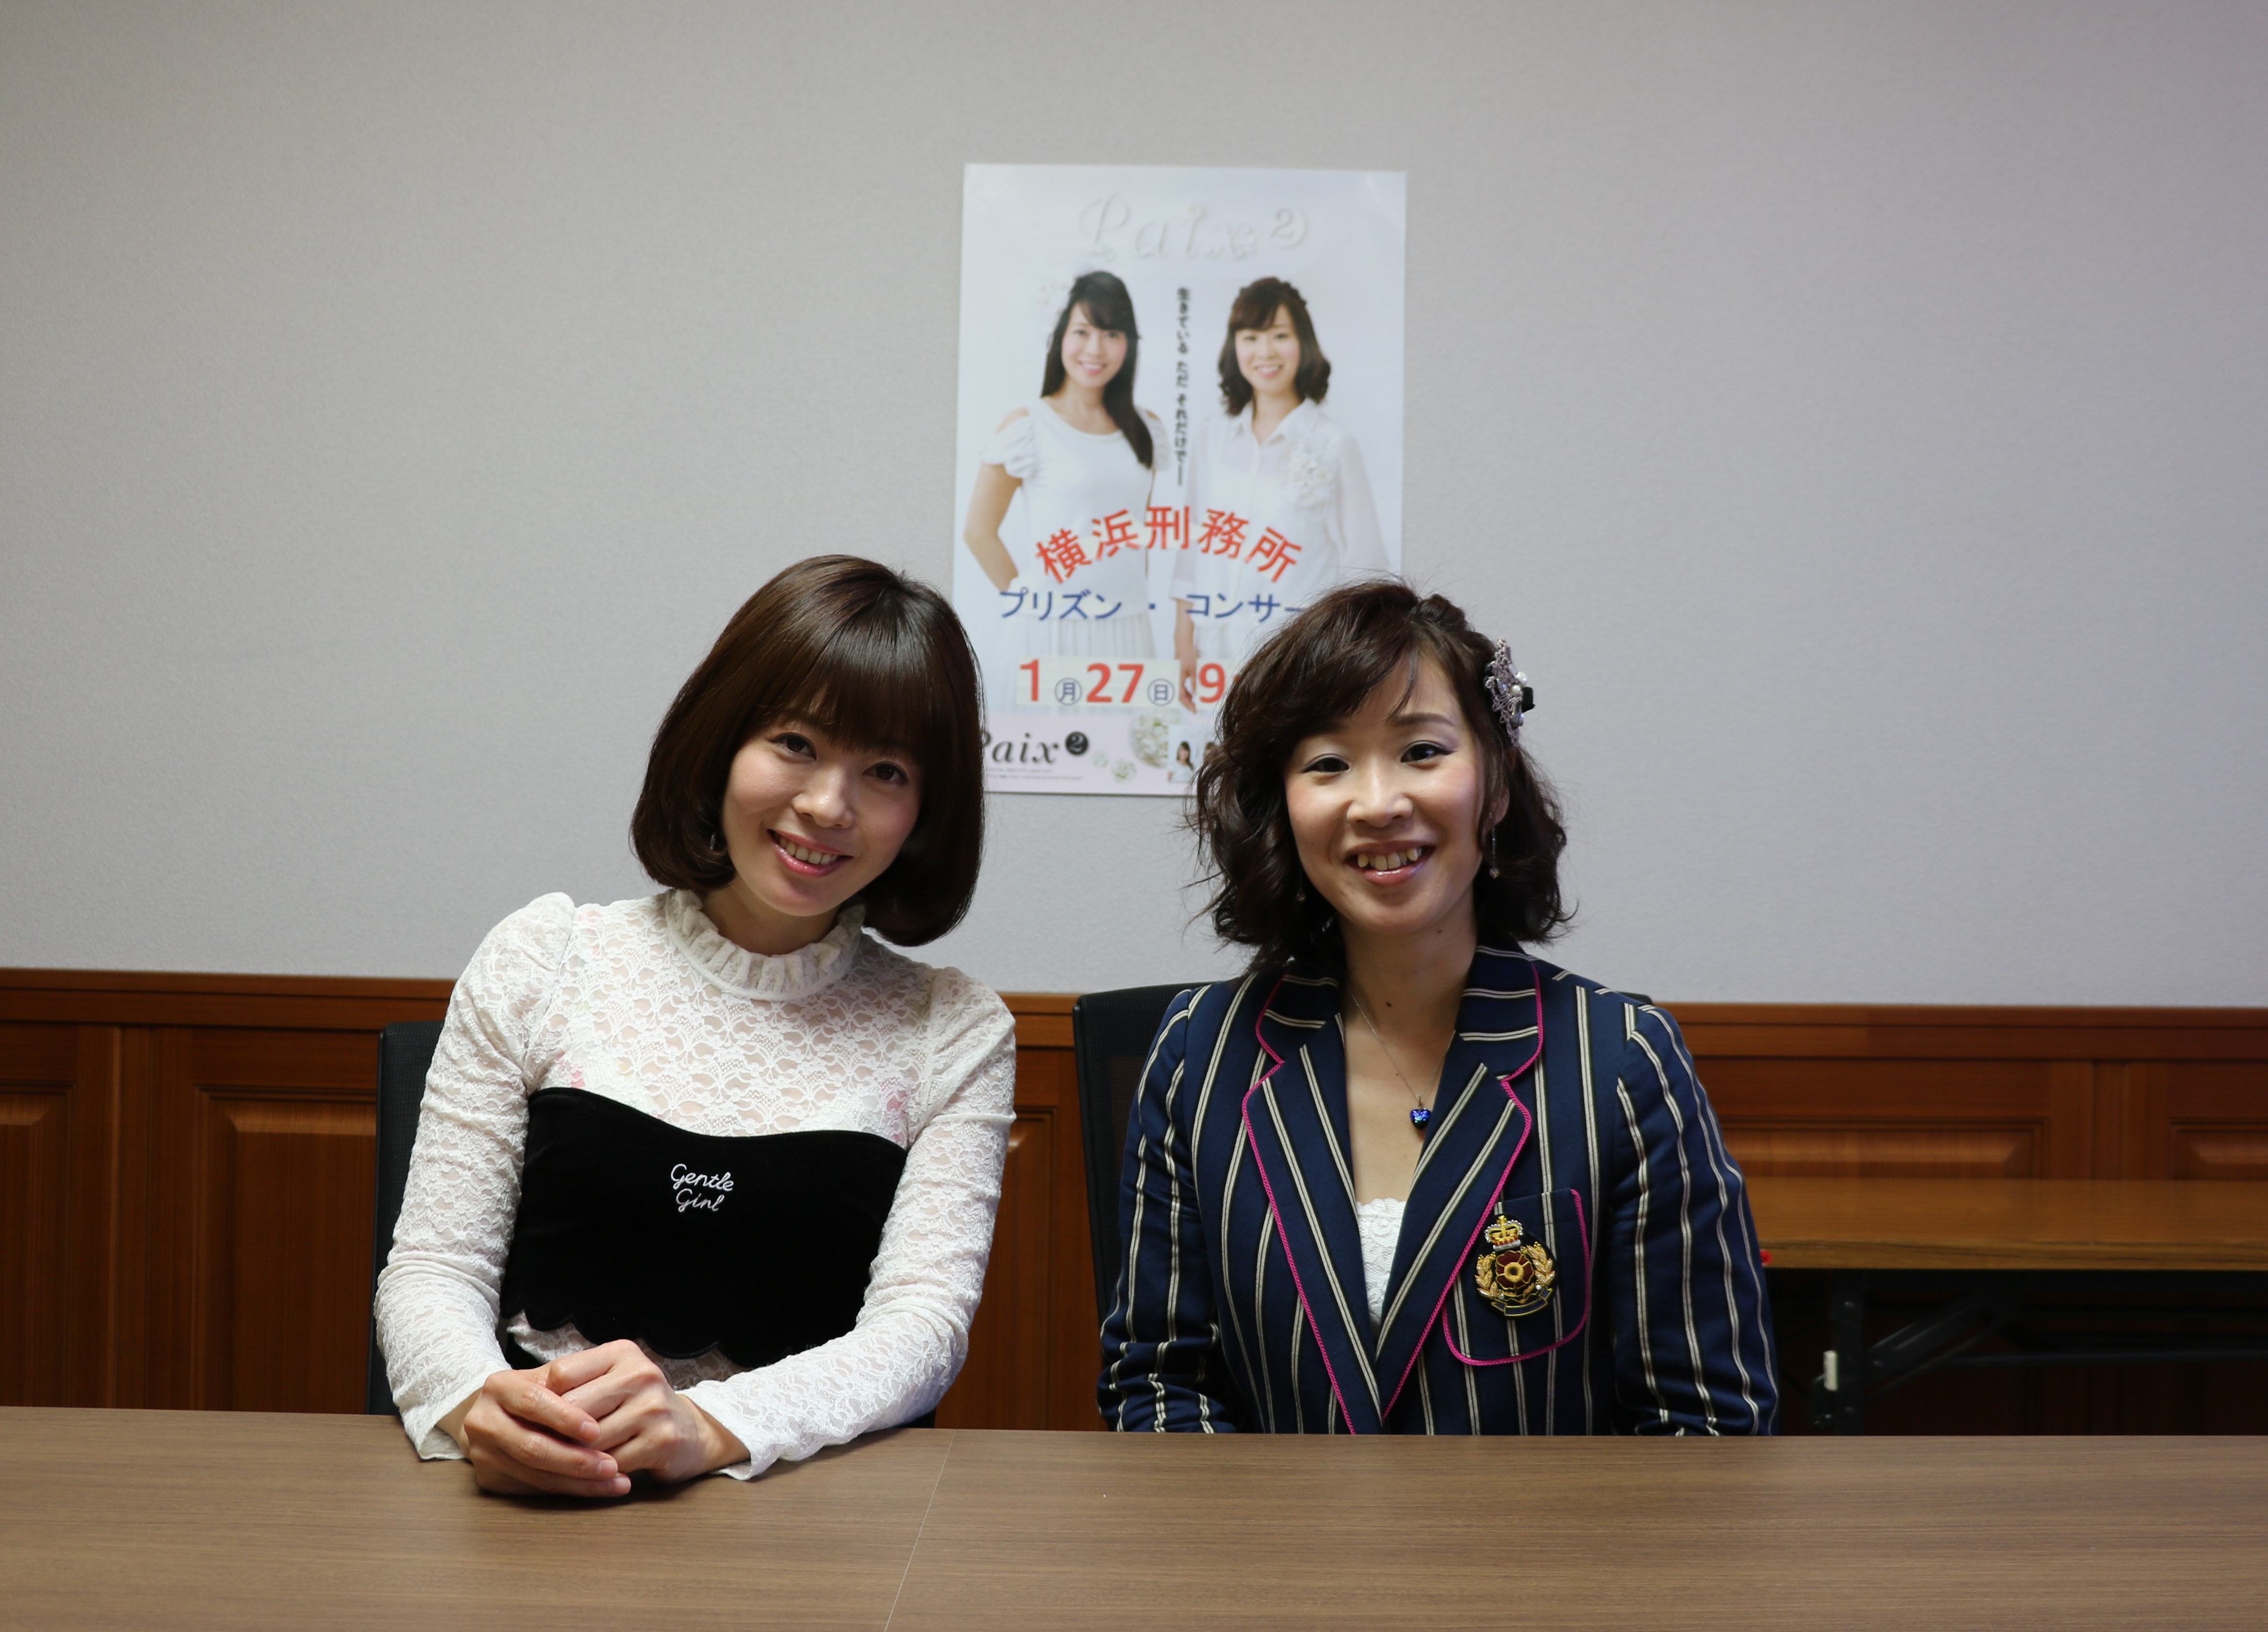 Dynamic duo: Manami Kitao (left) and Megumi Ikatsu, members of prison idol duo Paix2, pose for a photo at Yokohama Prison in Kanagawa Prefecture, after giving a concert for inmates on Jan. 27 . | KYODO